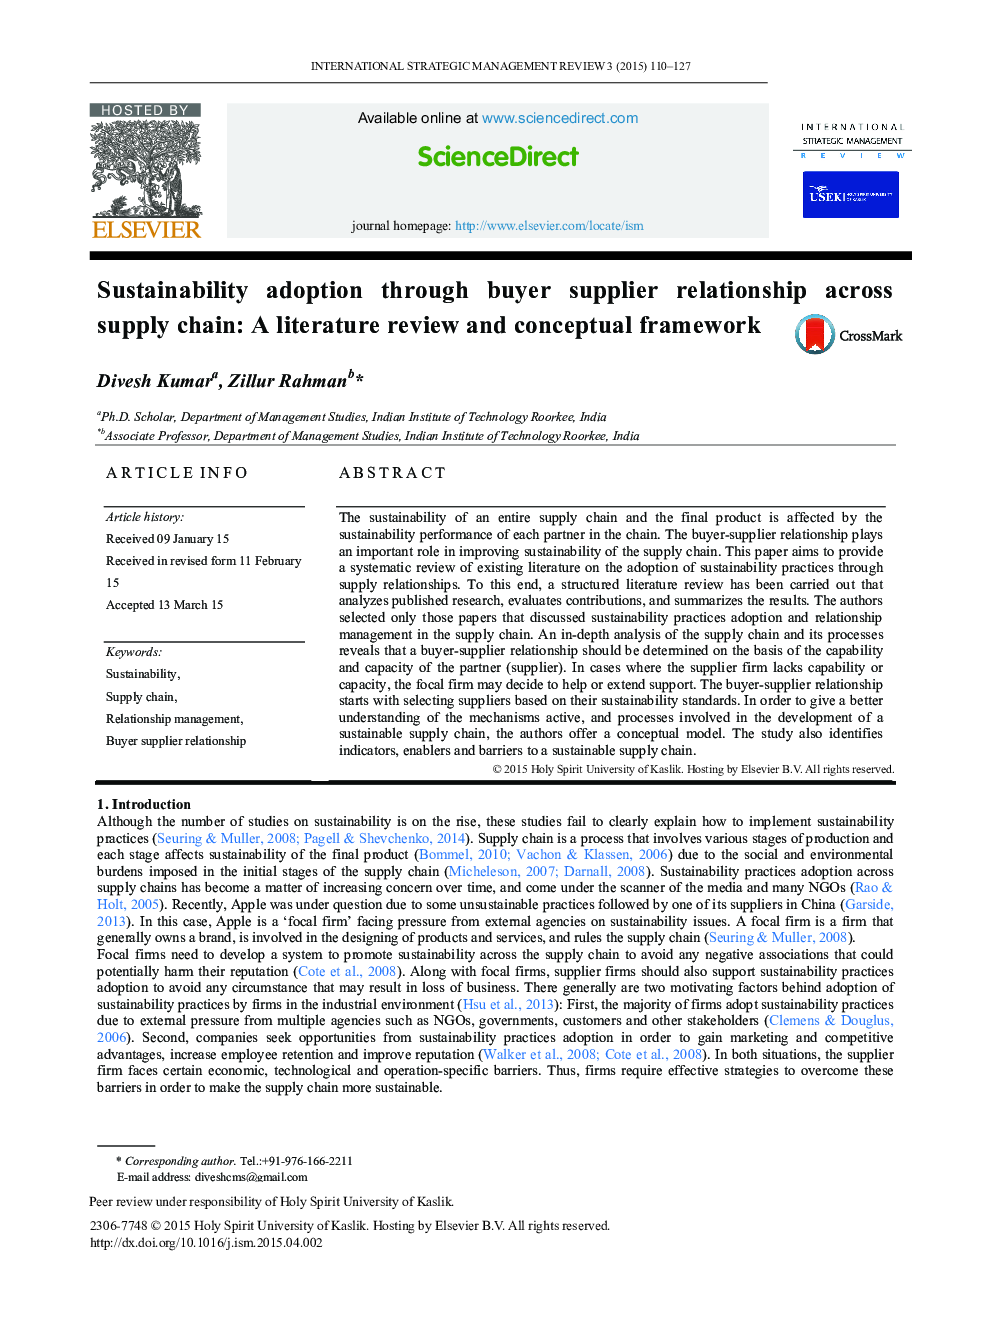 Sustainability adoption through buyer supplier relationship across supply chain: A literature review and conceptual framework 